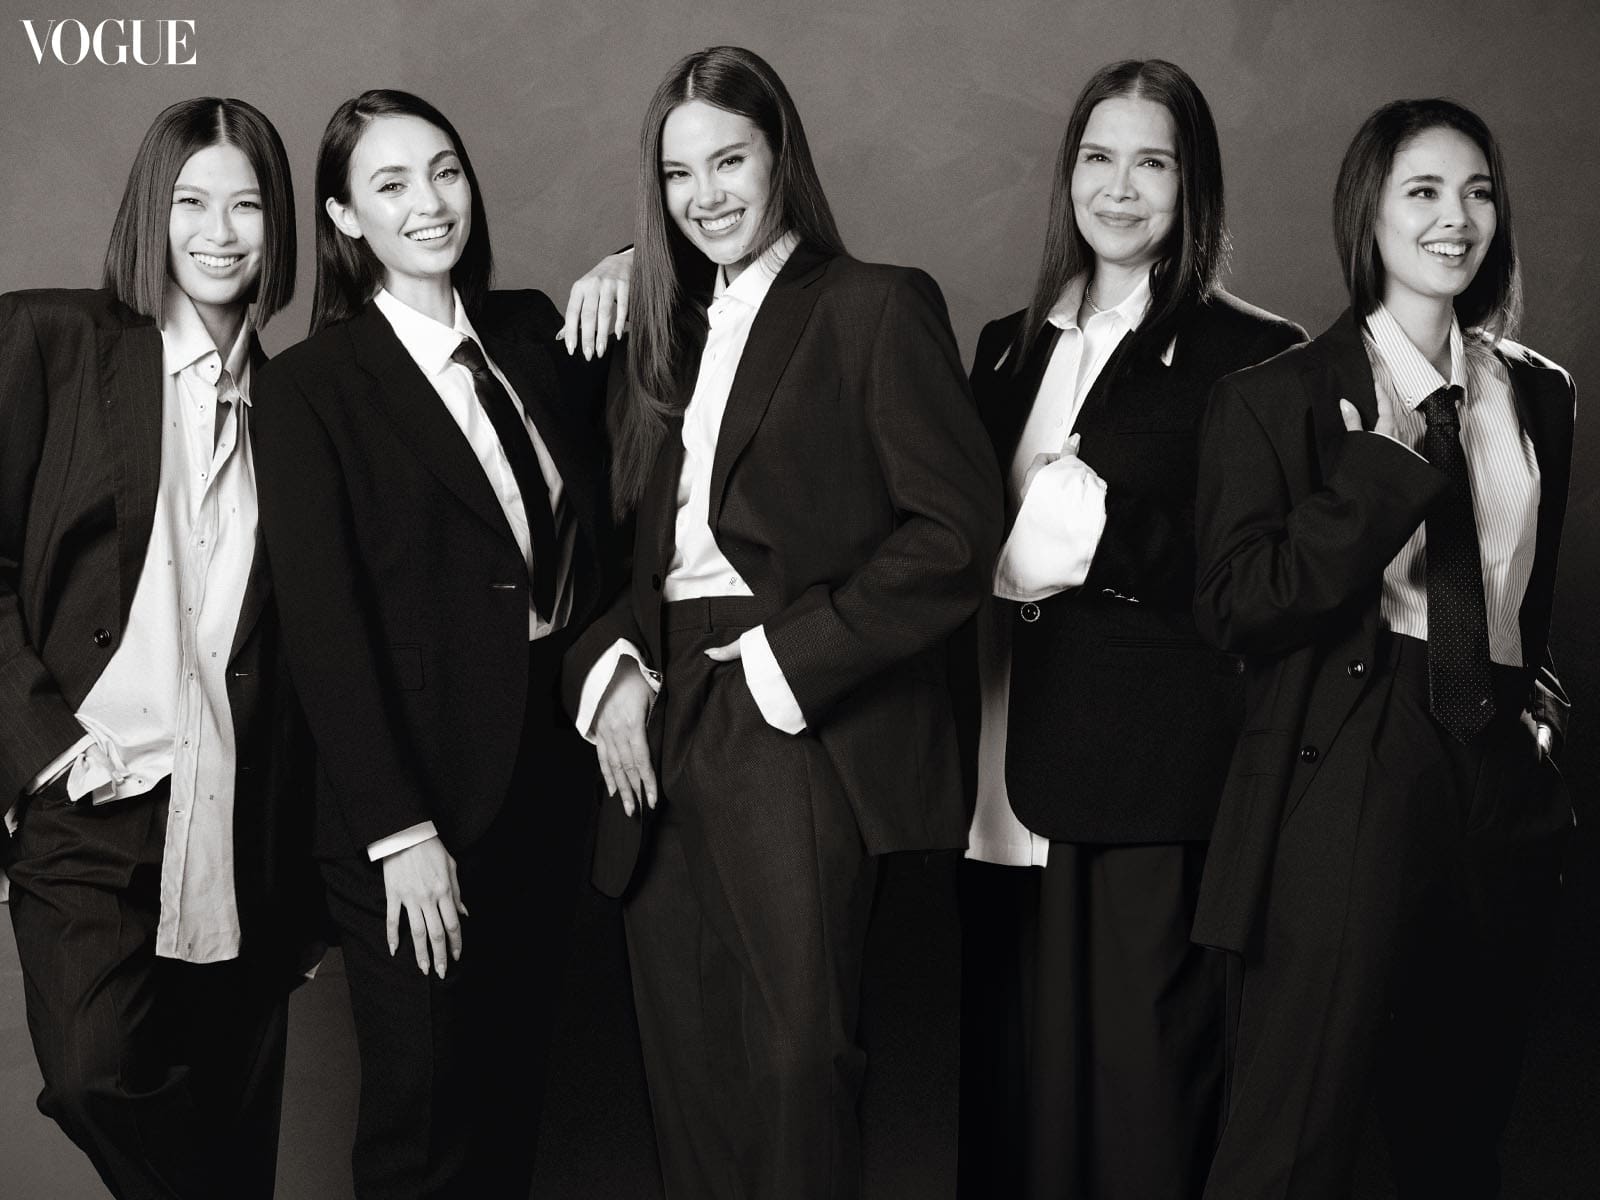 Megan Young, Melanie Marquez, Catriona Gray, R'Bonney Gabriel, and Michelle Dee smiling in black and white suits